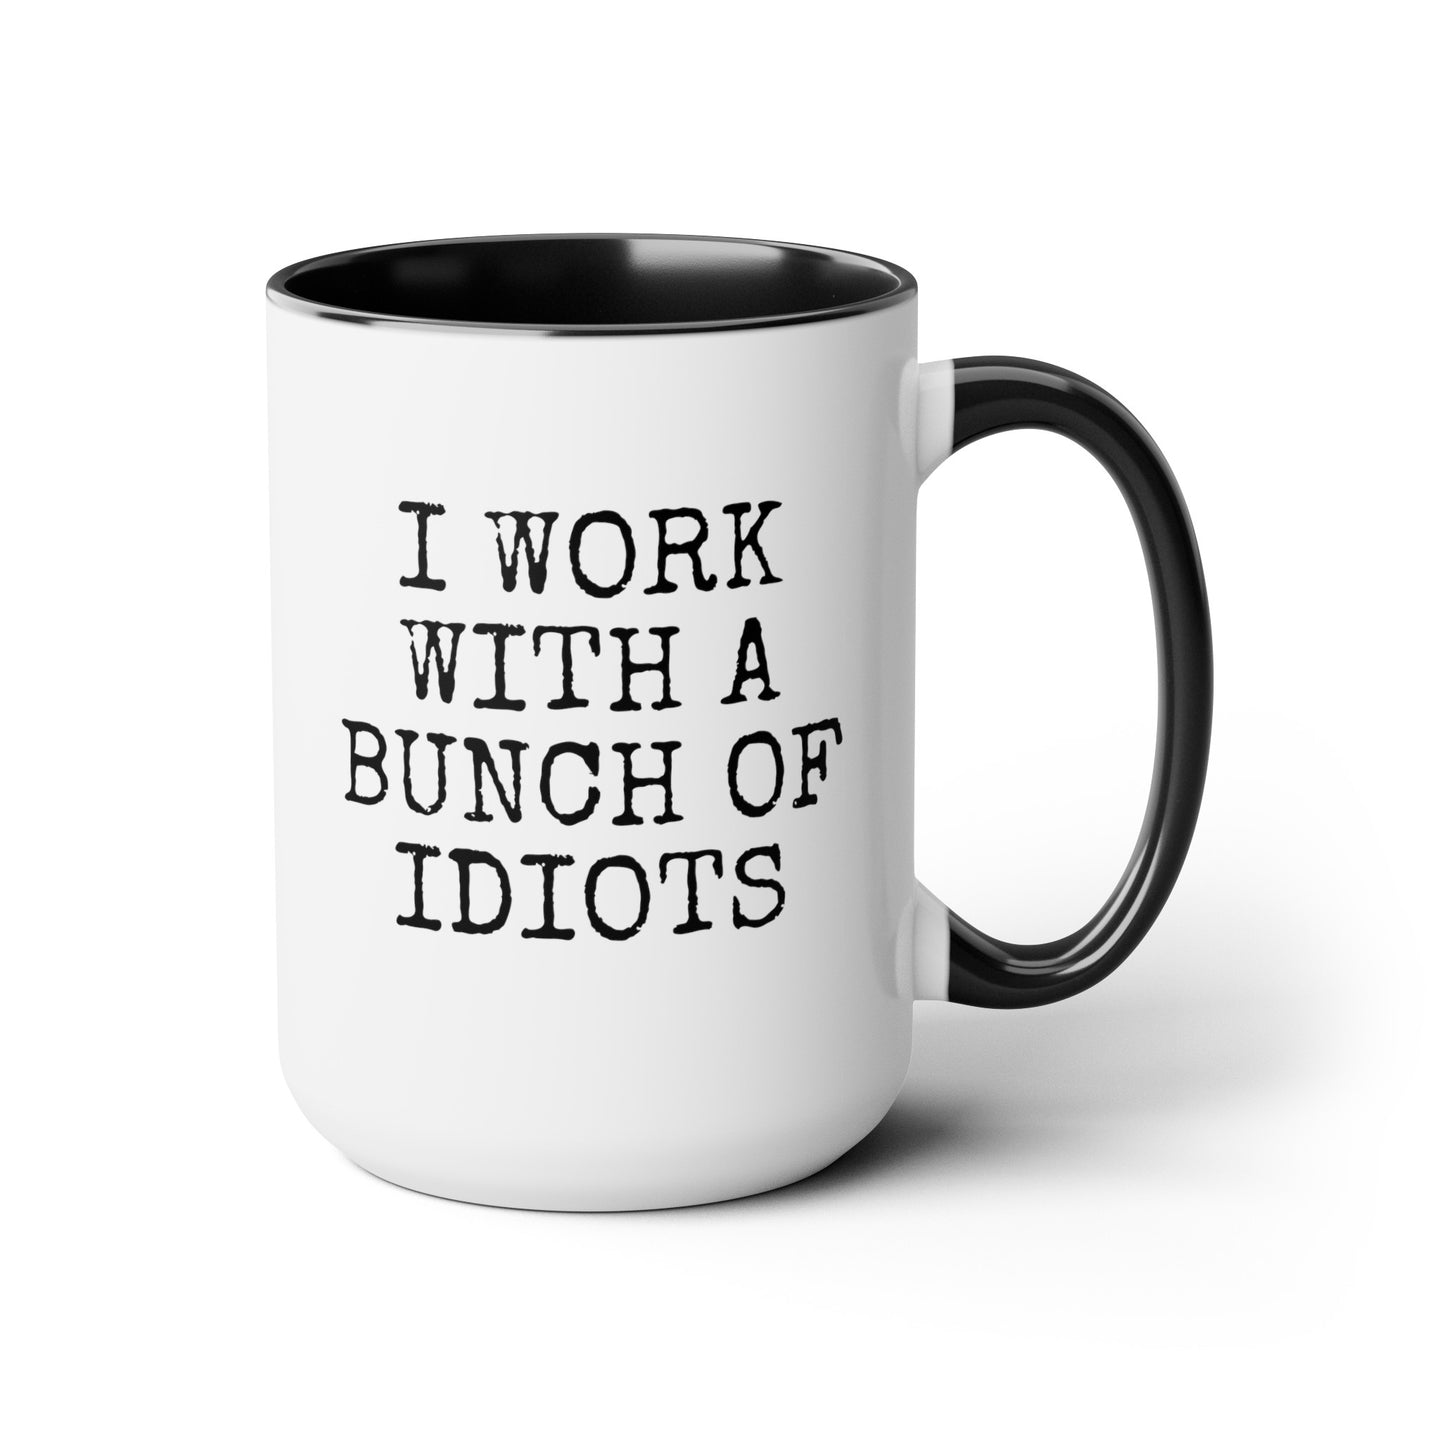 I Work With A Bunch Of Idiots 15oz white with black accent funny large coffee mug gift for coworker office humor novelty work joke christmas secret santa present waveywares wavey wares wavywares wavy wares